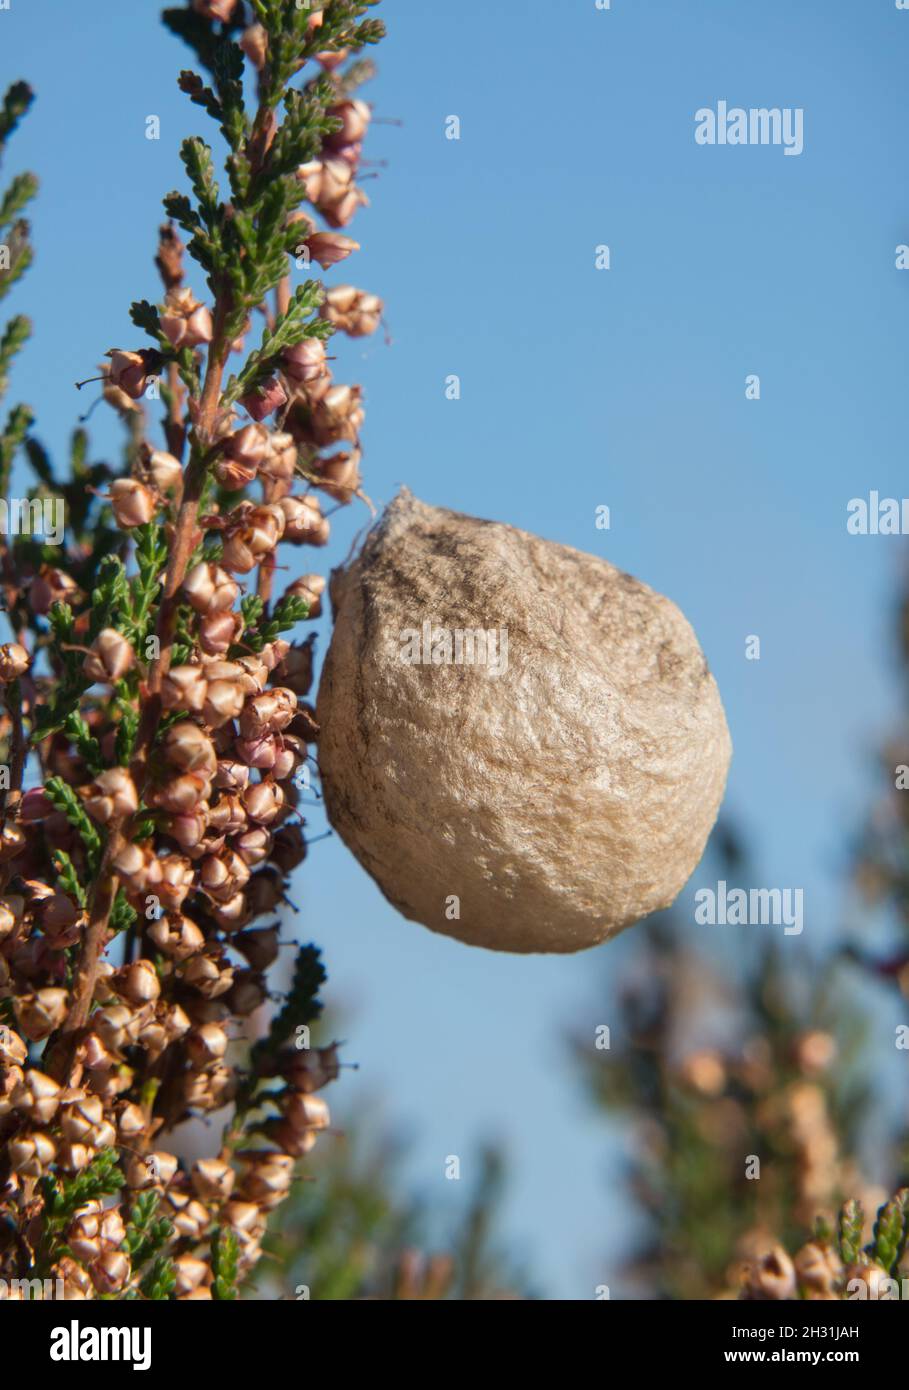 Egg sac of Wasp spider in Common heather under blue sky Stock Photo